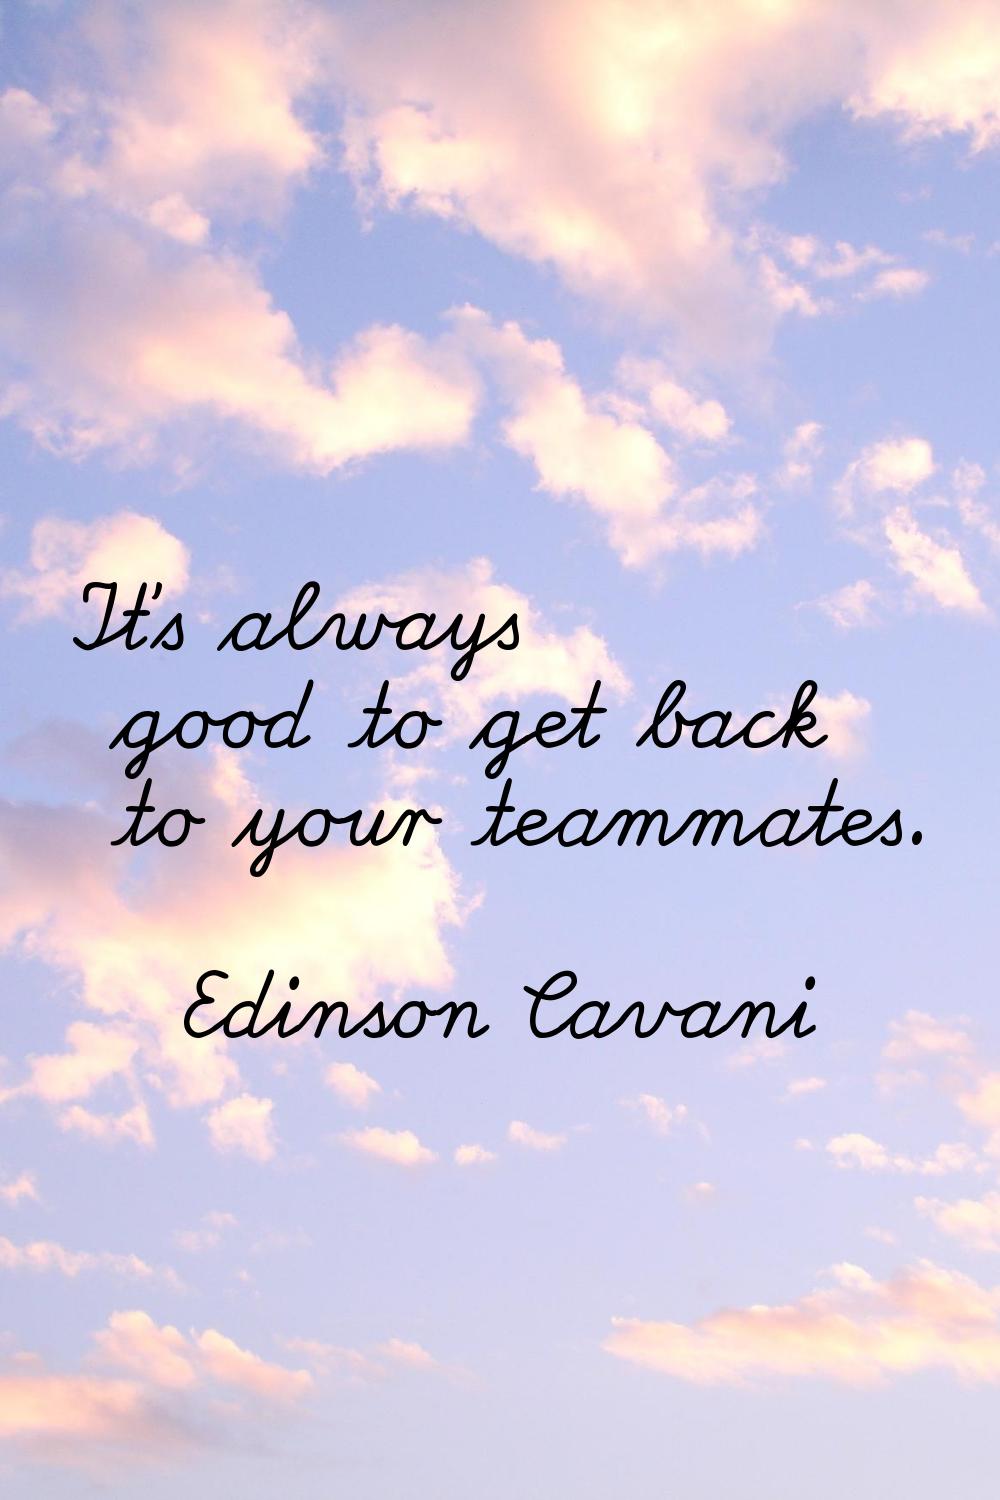 It's always good to get back to your teammates.